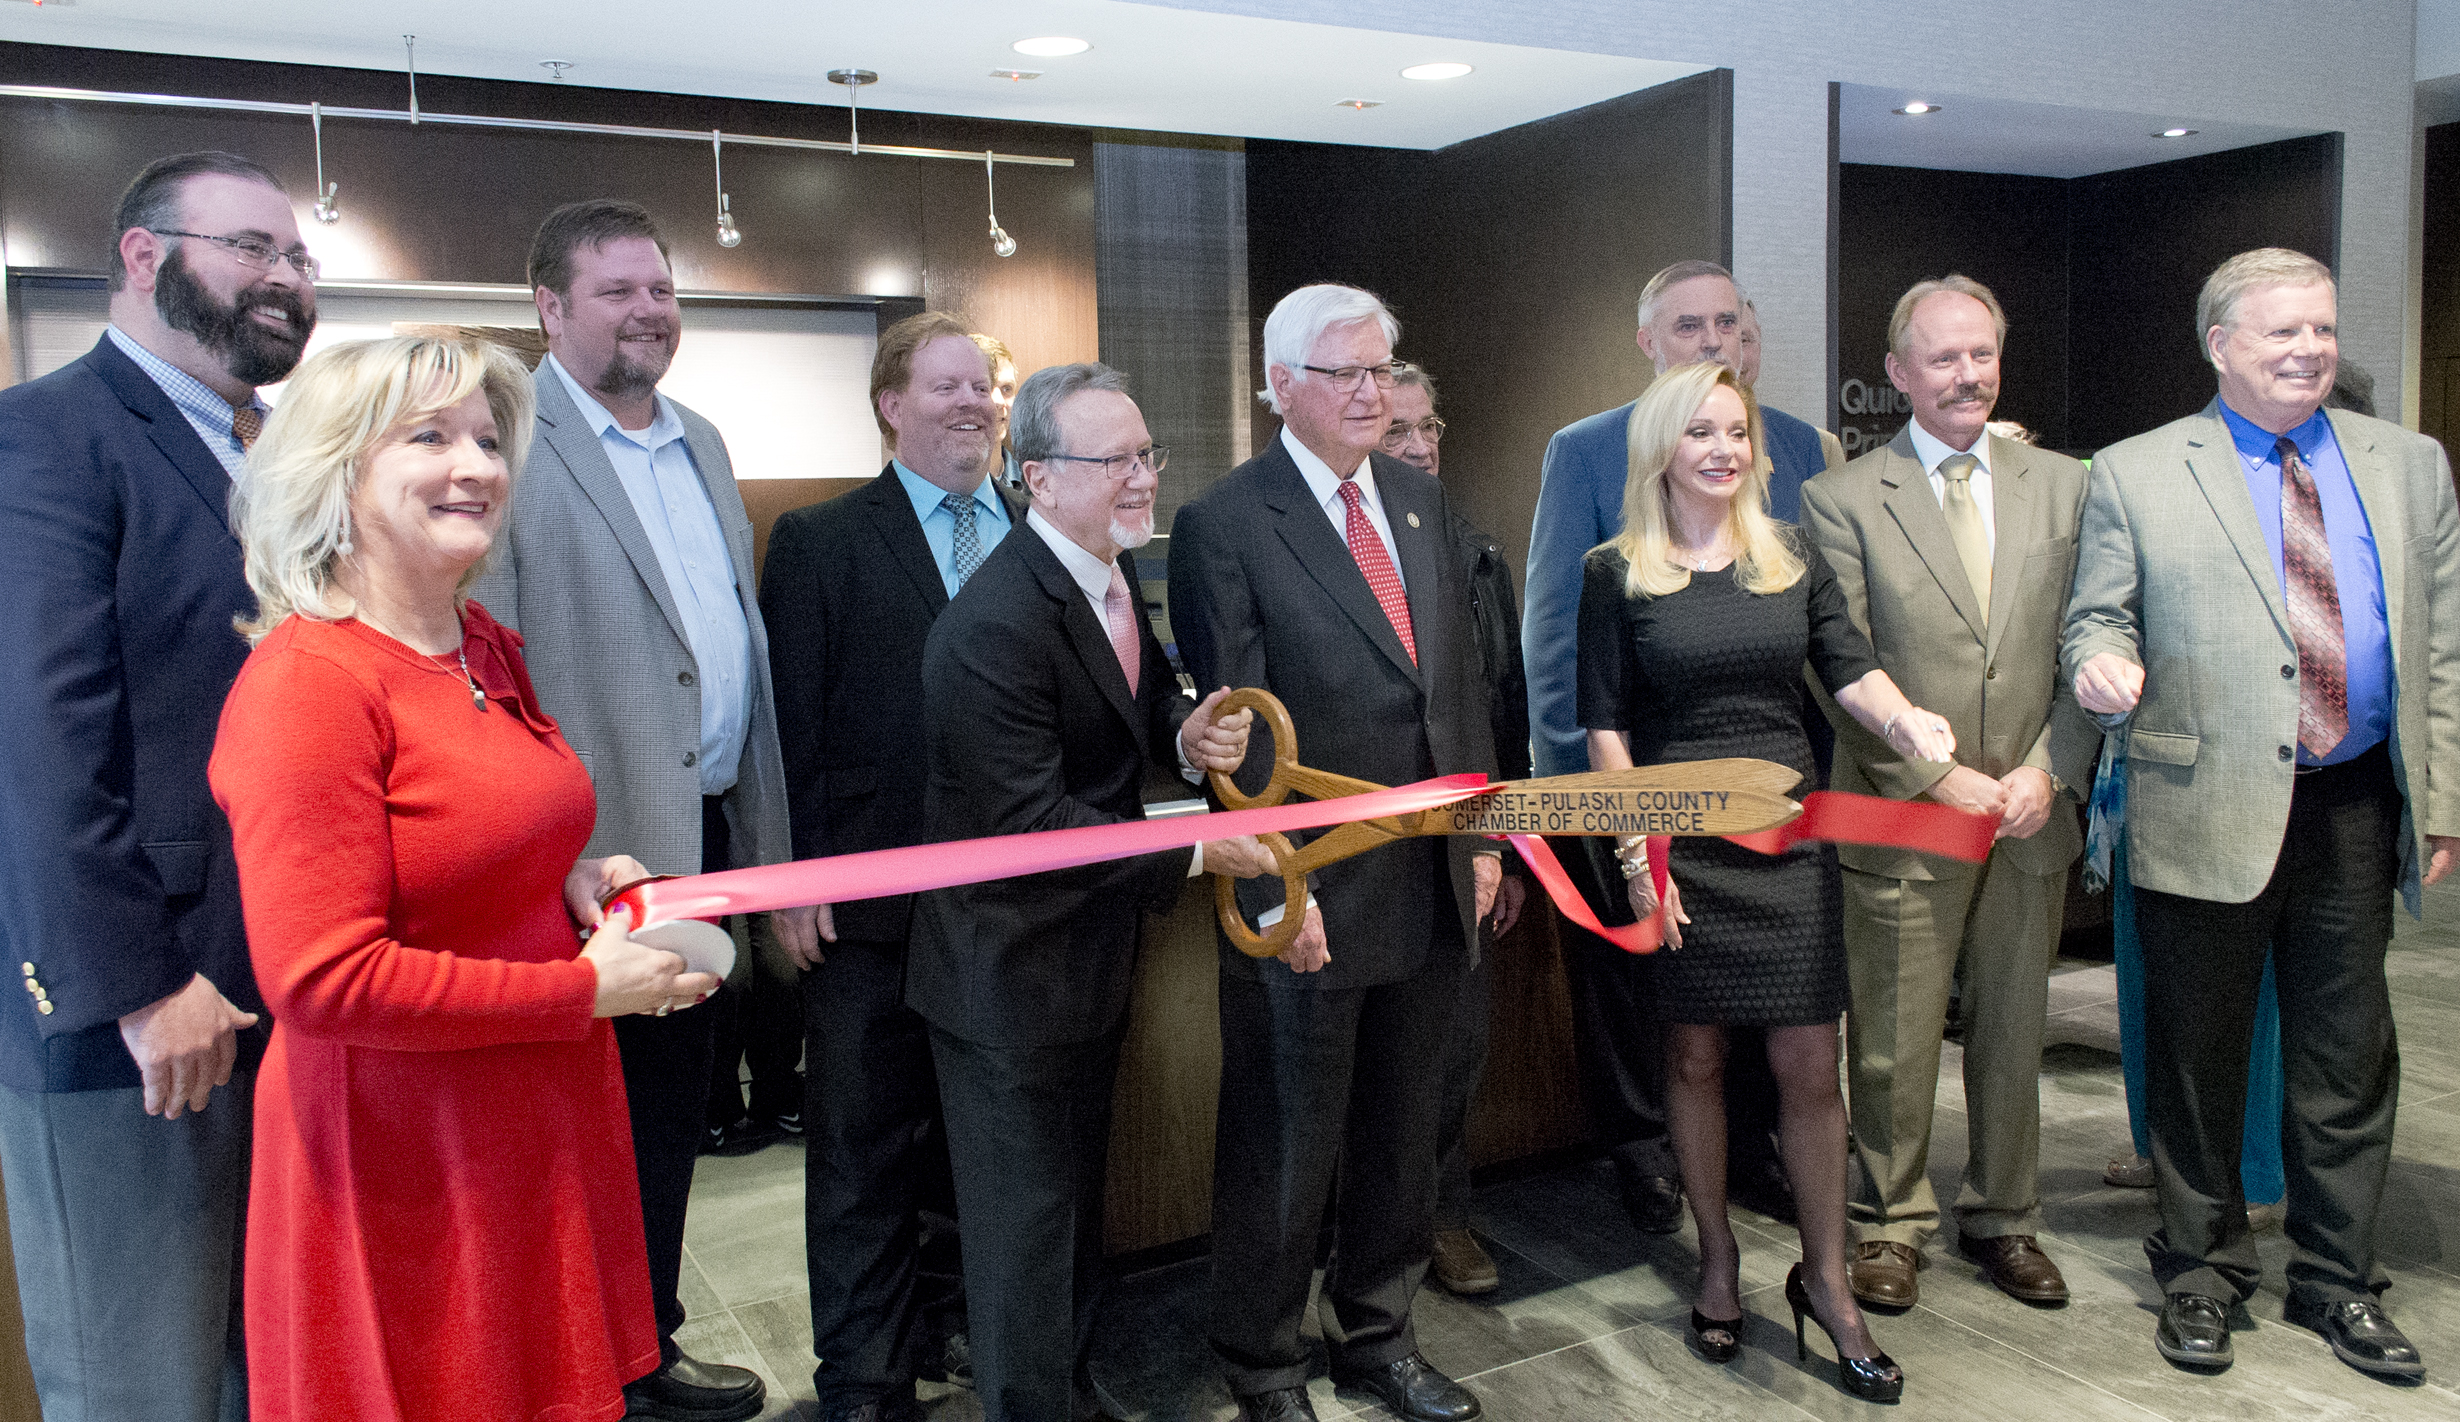 Grand opening of Courtyard by Marriott adjacent to The Center